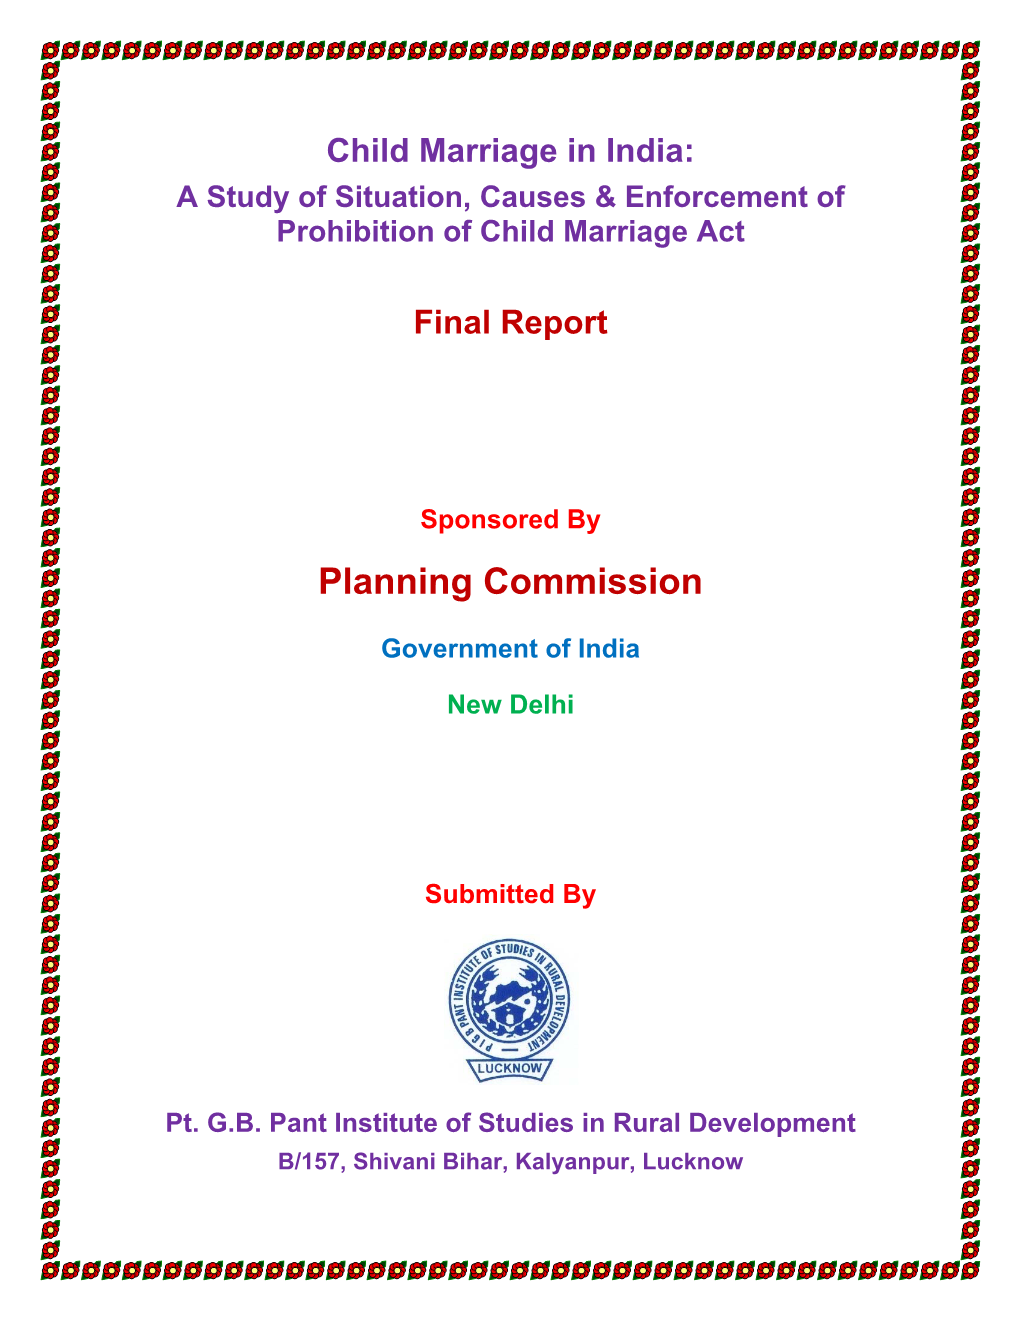 Child Marriage in India: a Study of Situation, Causes & Enforcement of Prohibition of Child Marriage Act